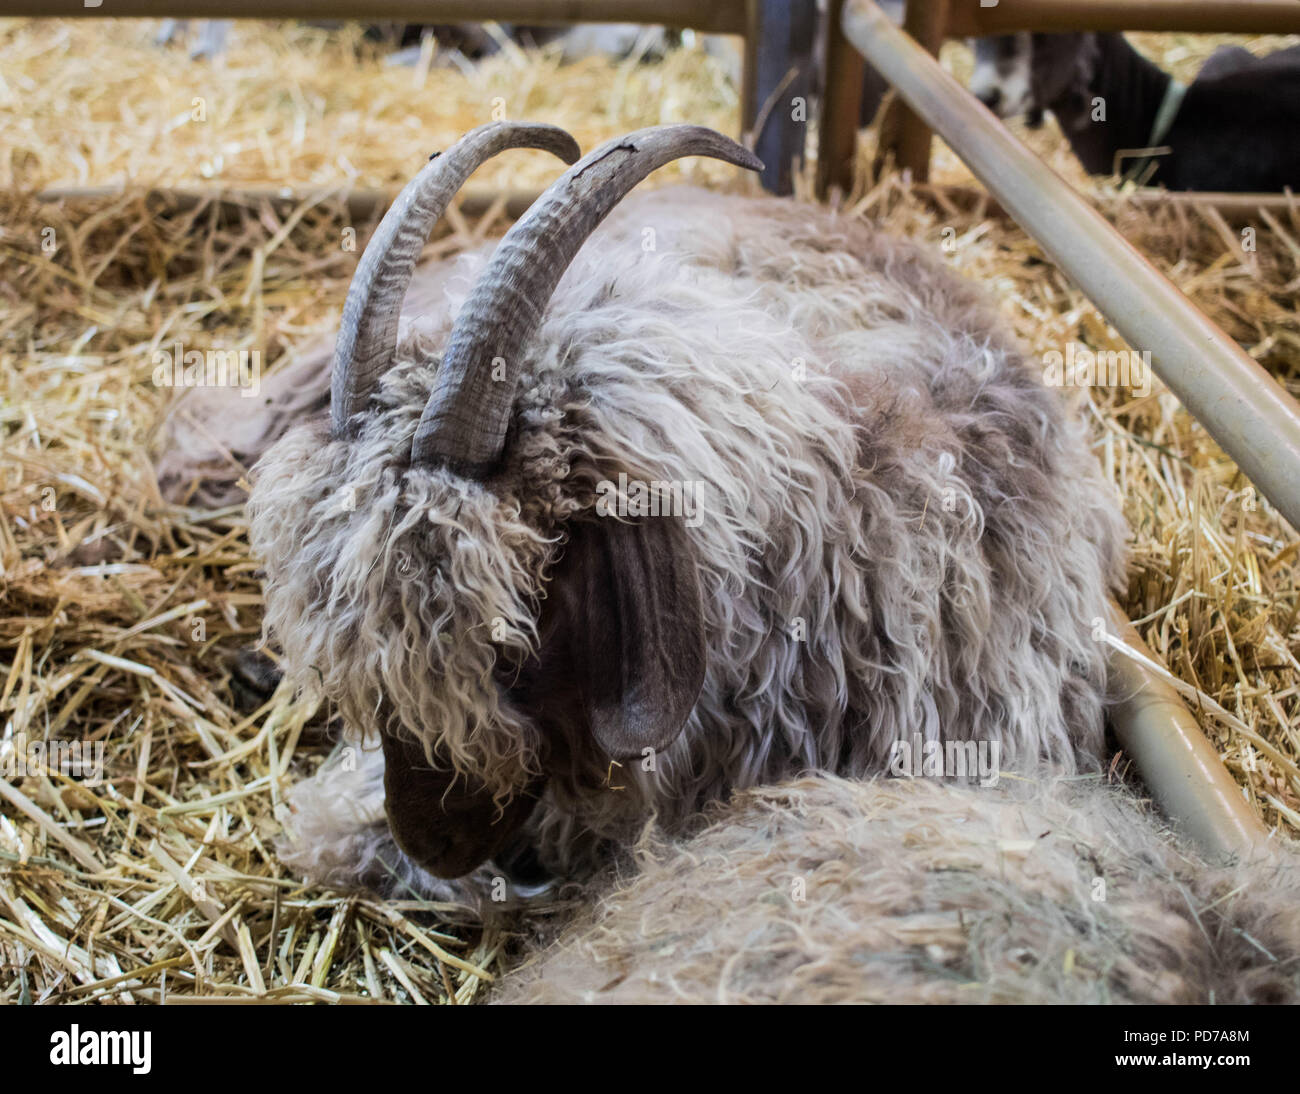 Black long haired male goat over blur background  CanStock